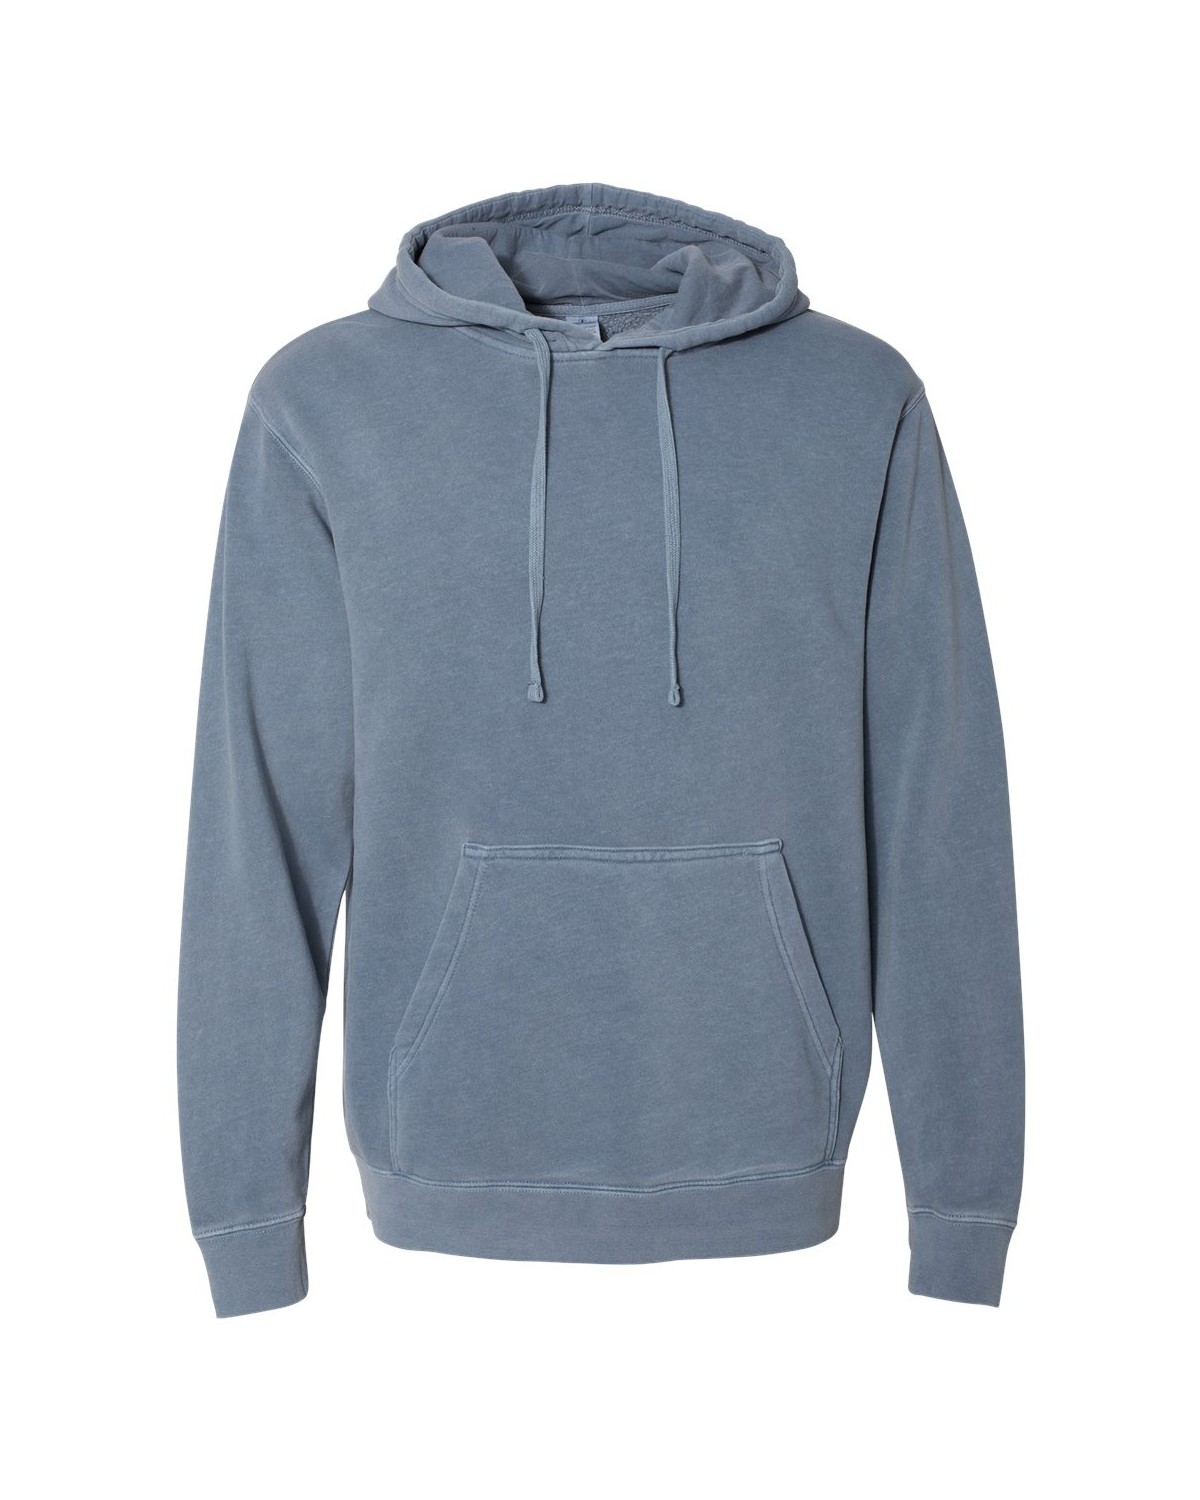 Independent Trading Co. PRM4500 Unisex Midweight Pigment-Dyed Hooded ...